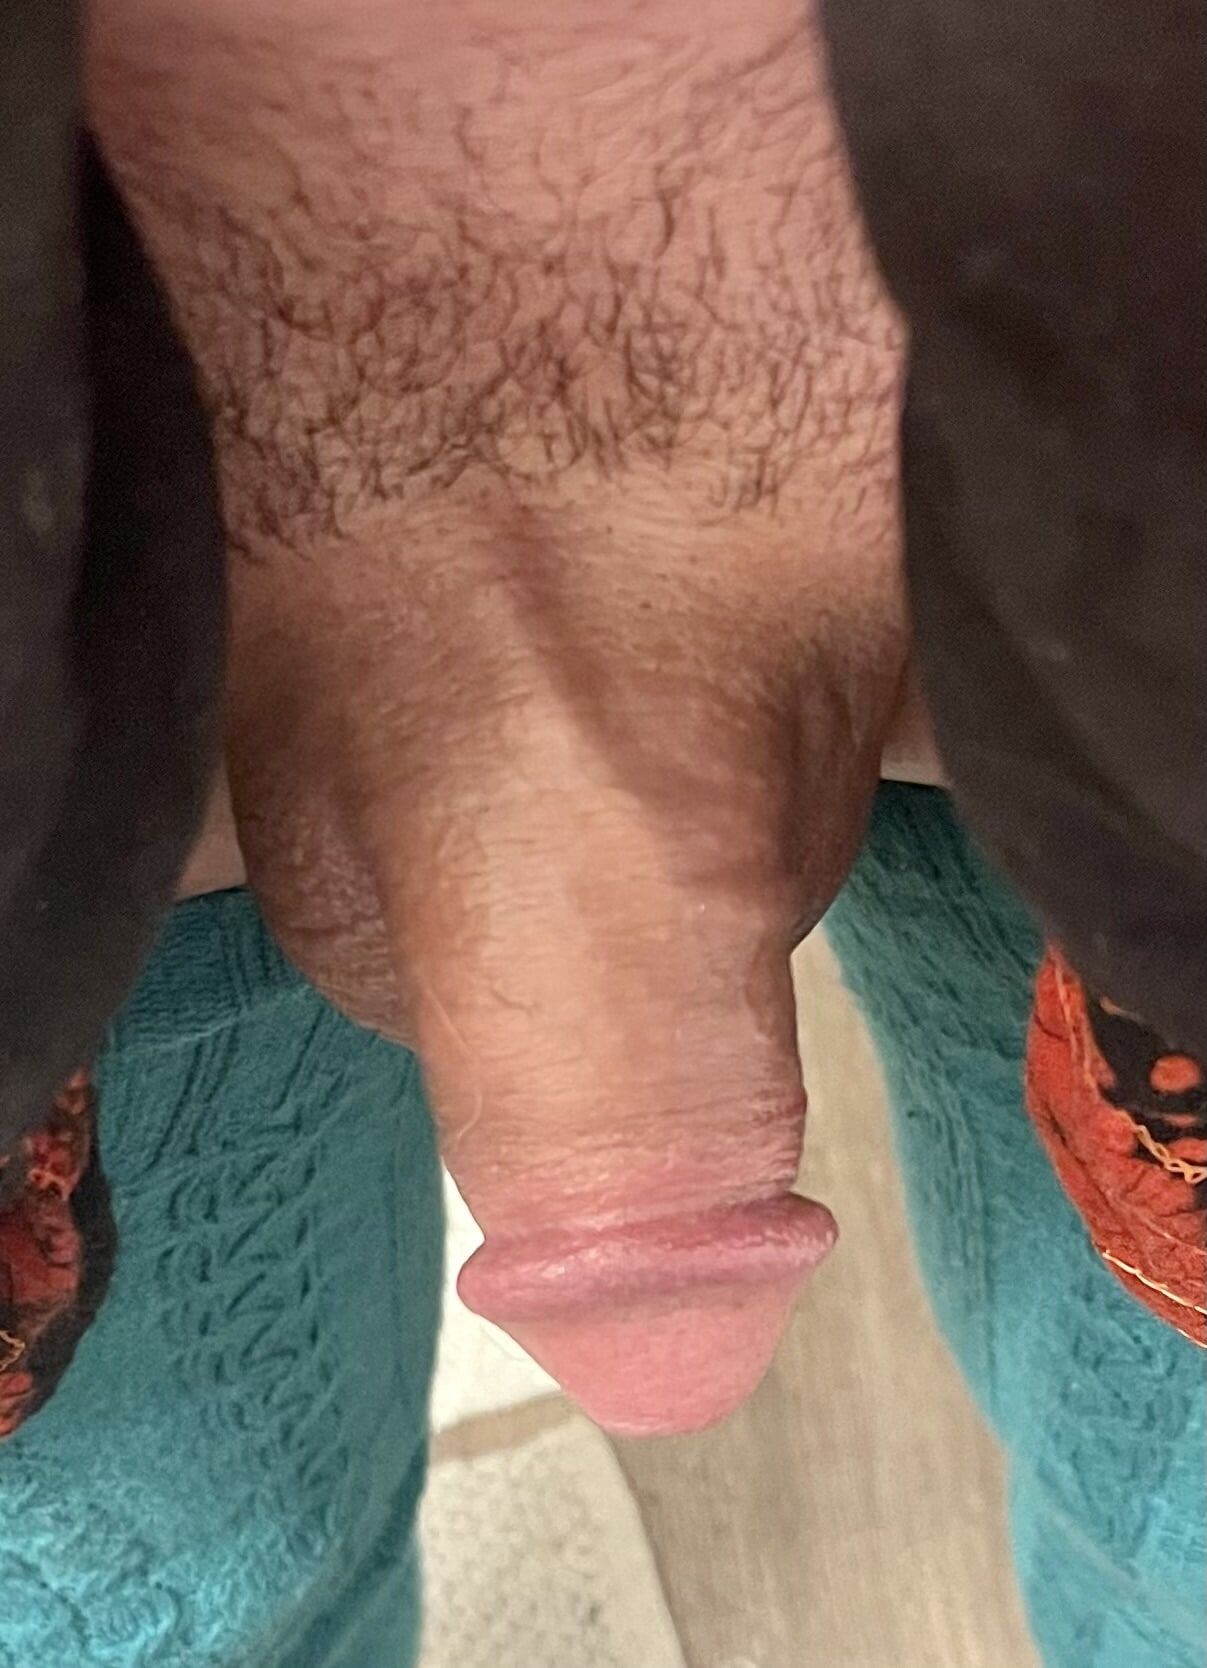 Tiny cock bitch dick any takers #4